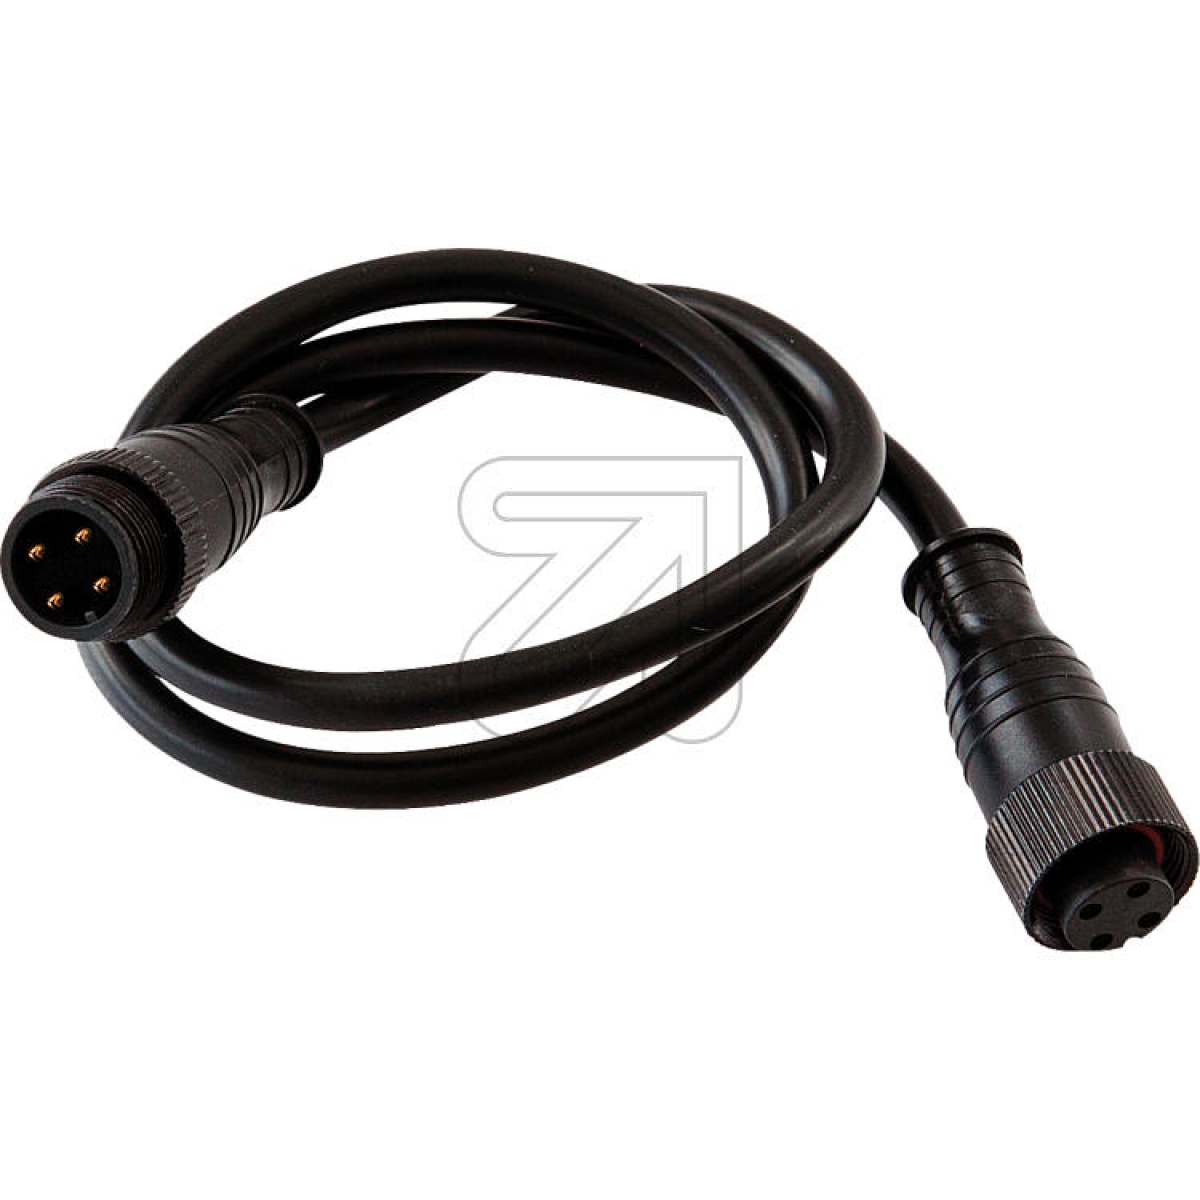 EVNConnecting cable 1m P65VBL100RGB to 624400, 624405Article-No: 624415